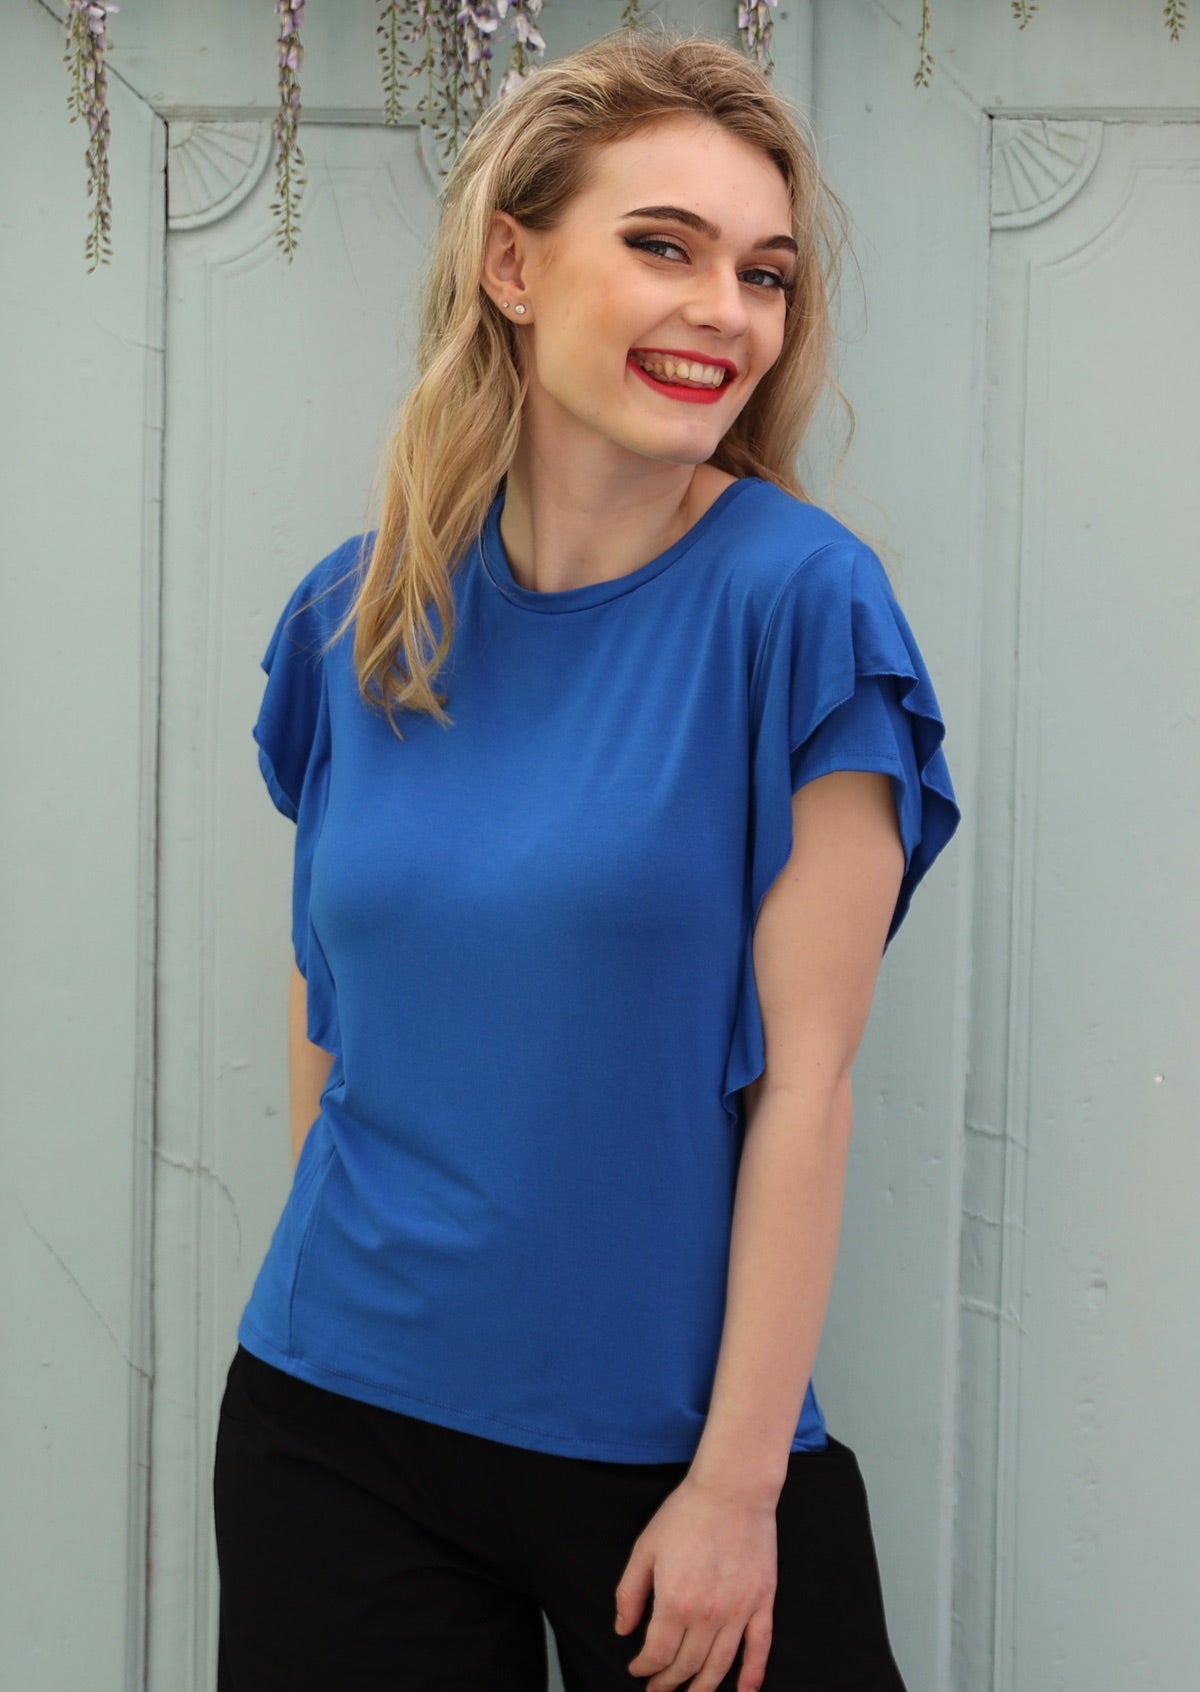 Ruffle Tee round neck short cap sleeve double stitched hems ruffle over shoulder tapers down side of top soft stretch rayon electric blue | Karma East Australia